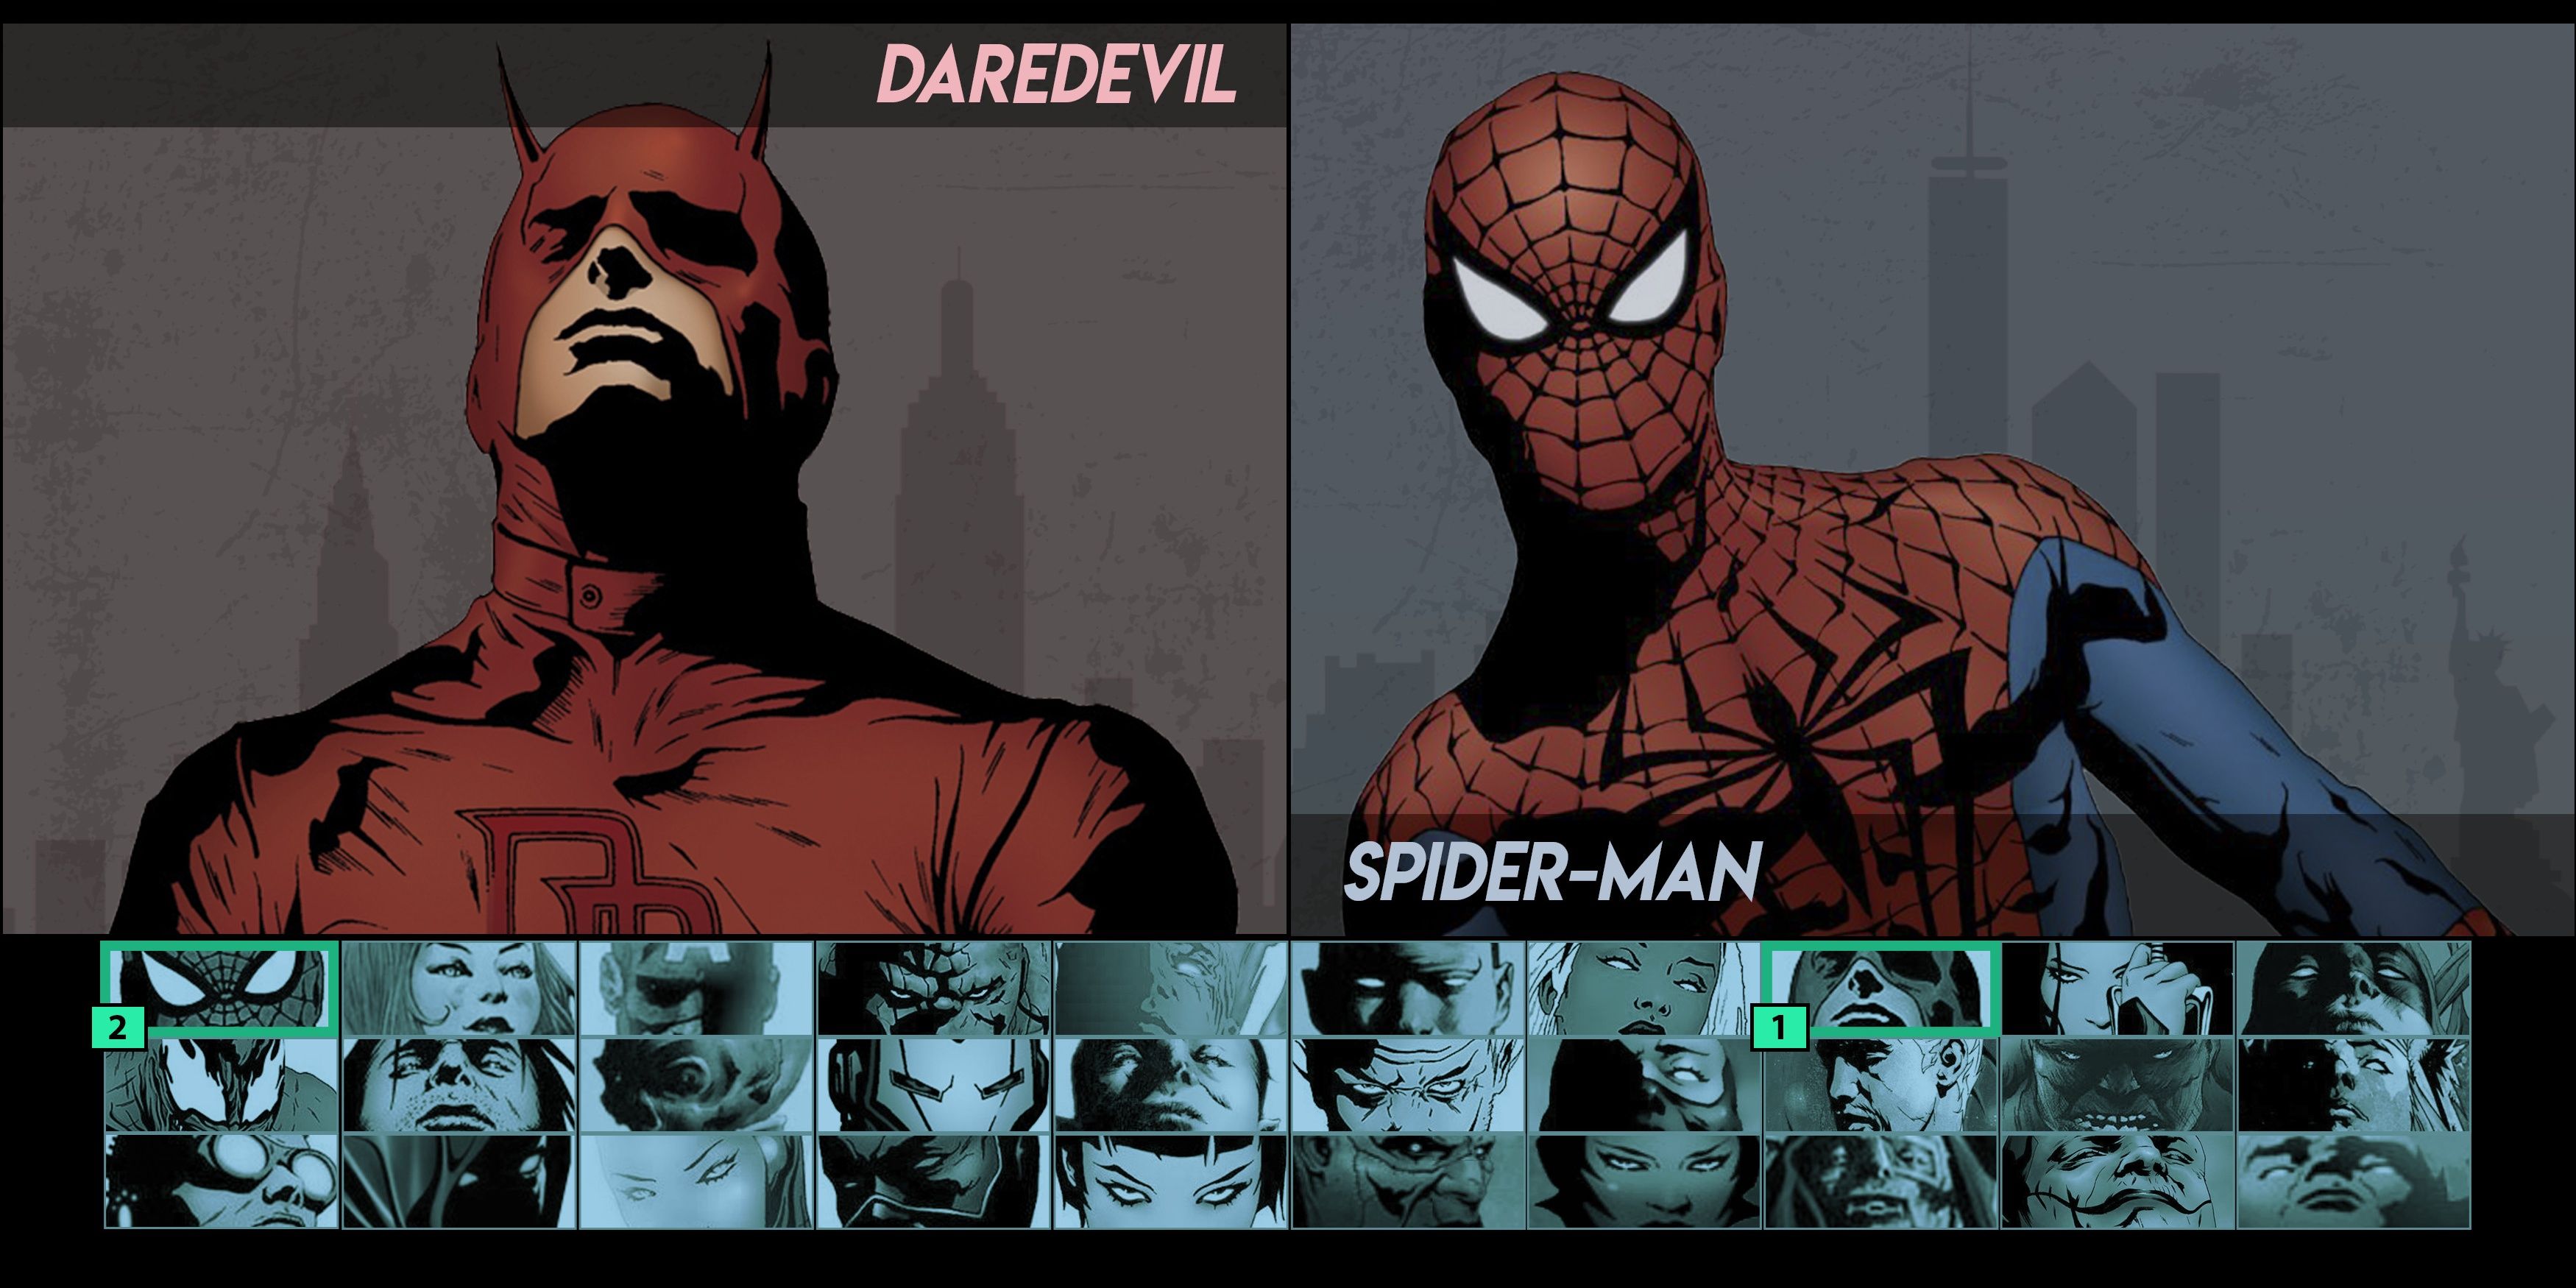 The character selection screen with Daredevil and Spider-Man selected as fighters